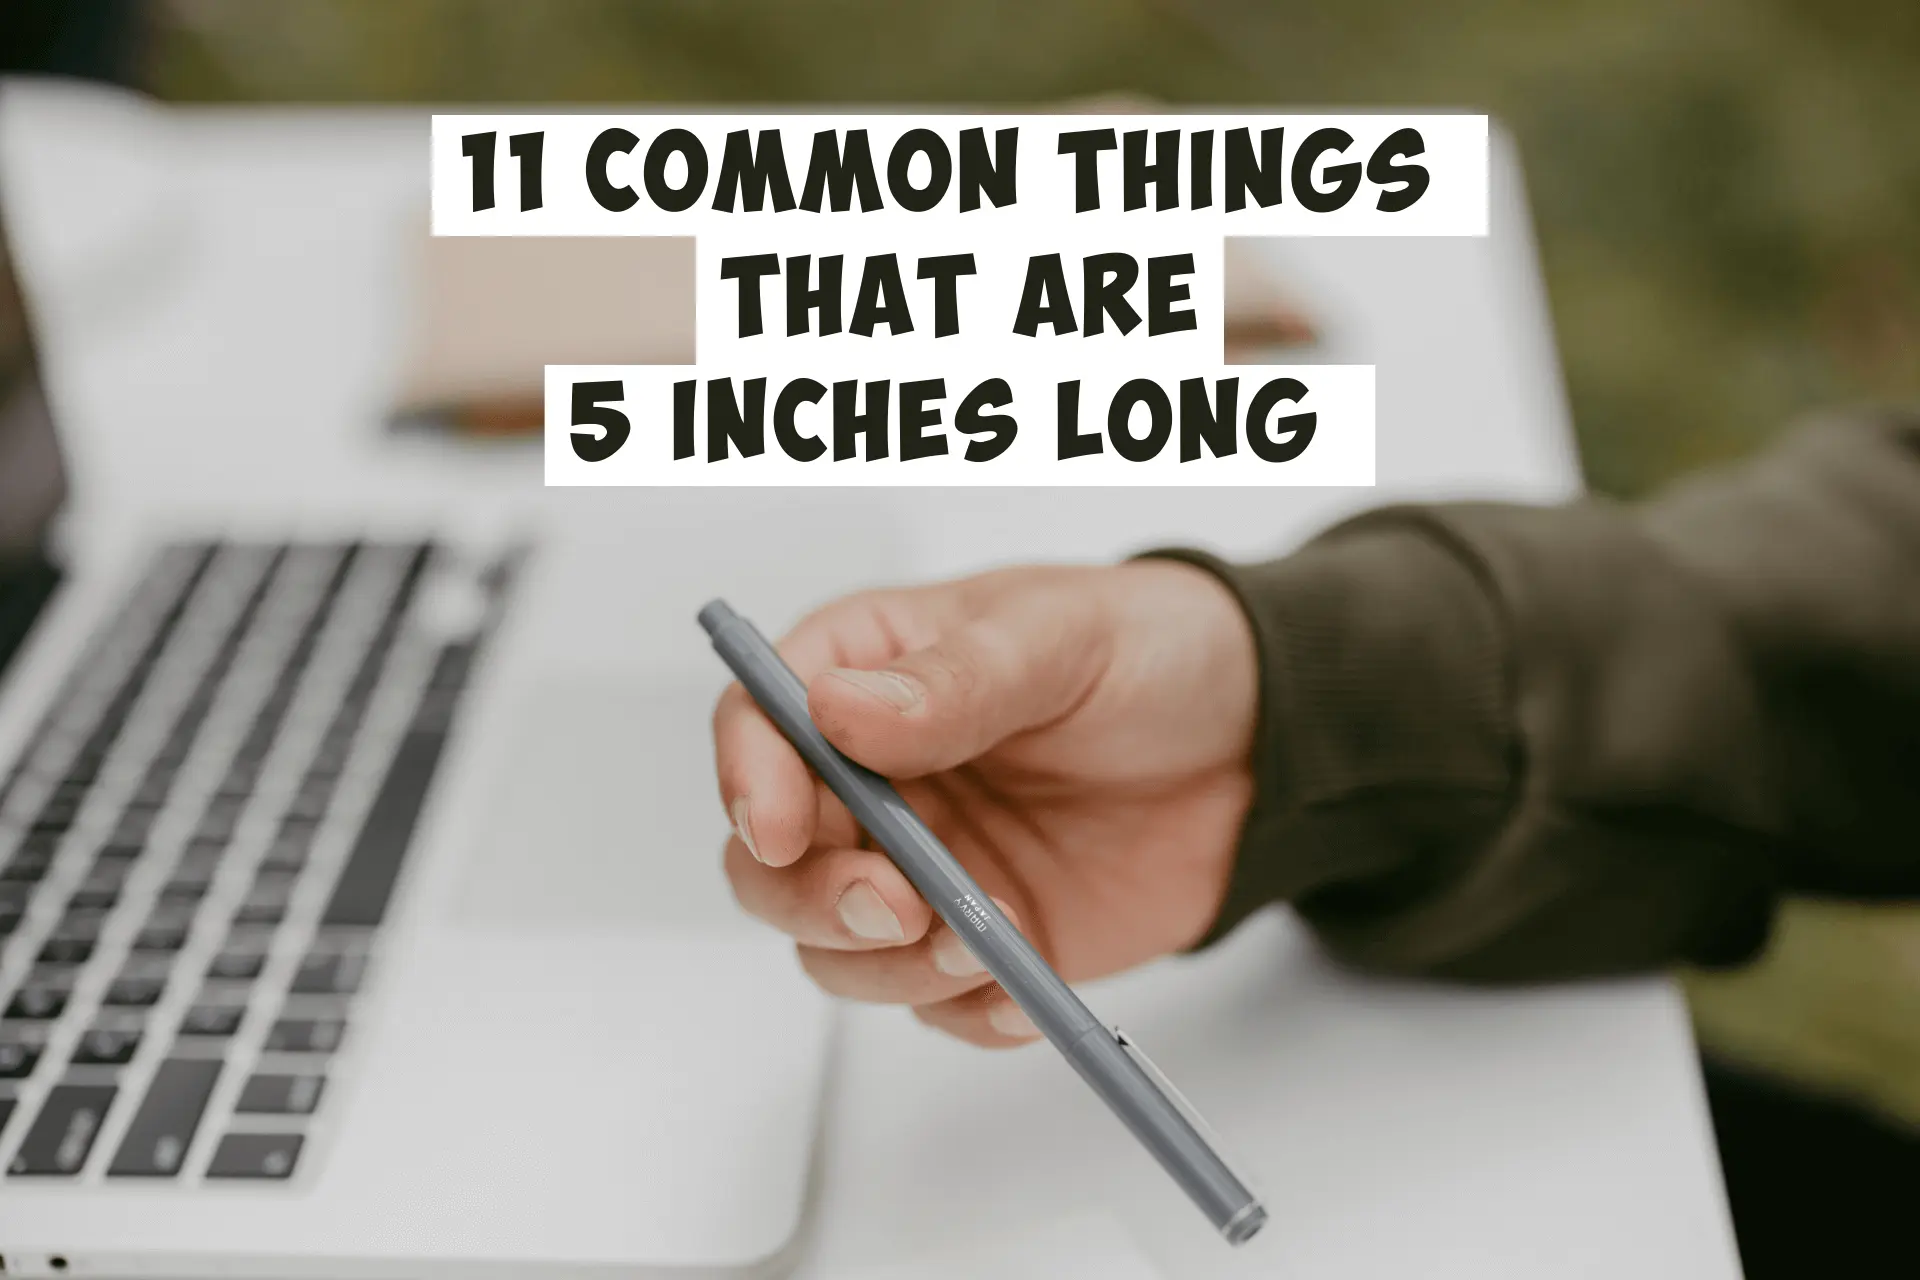 8 Common things that are 7 Inches long